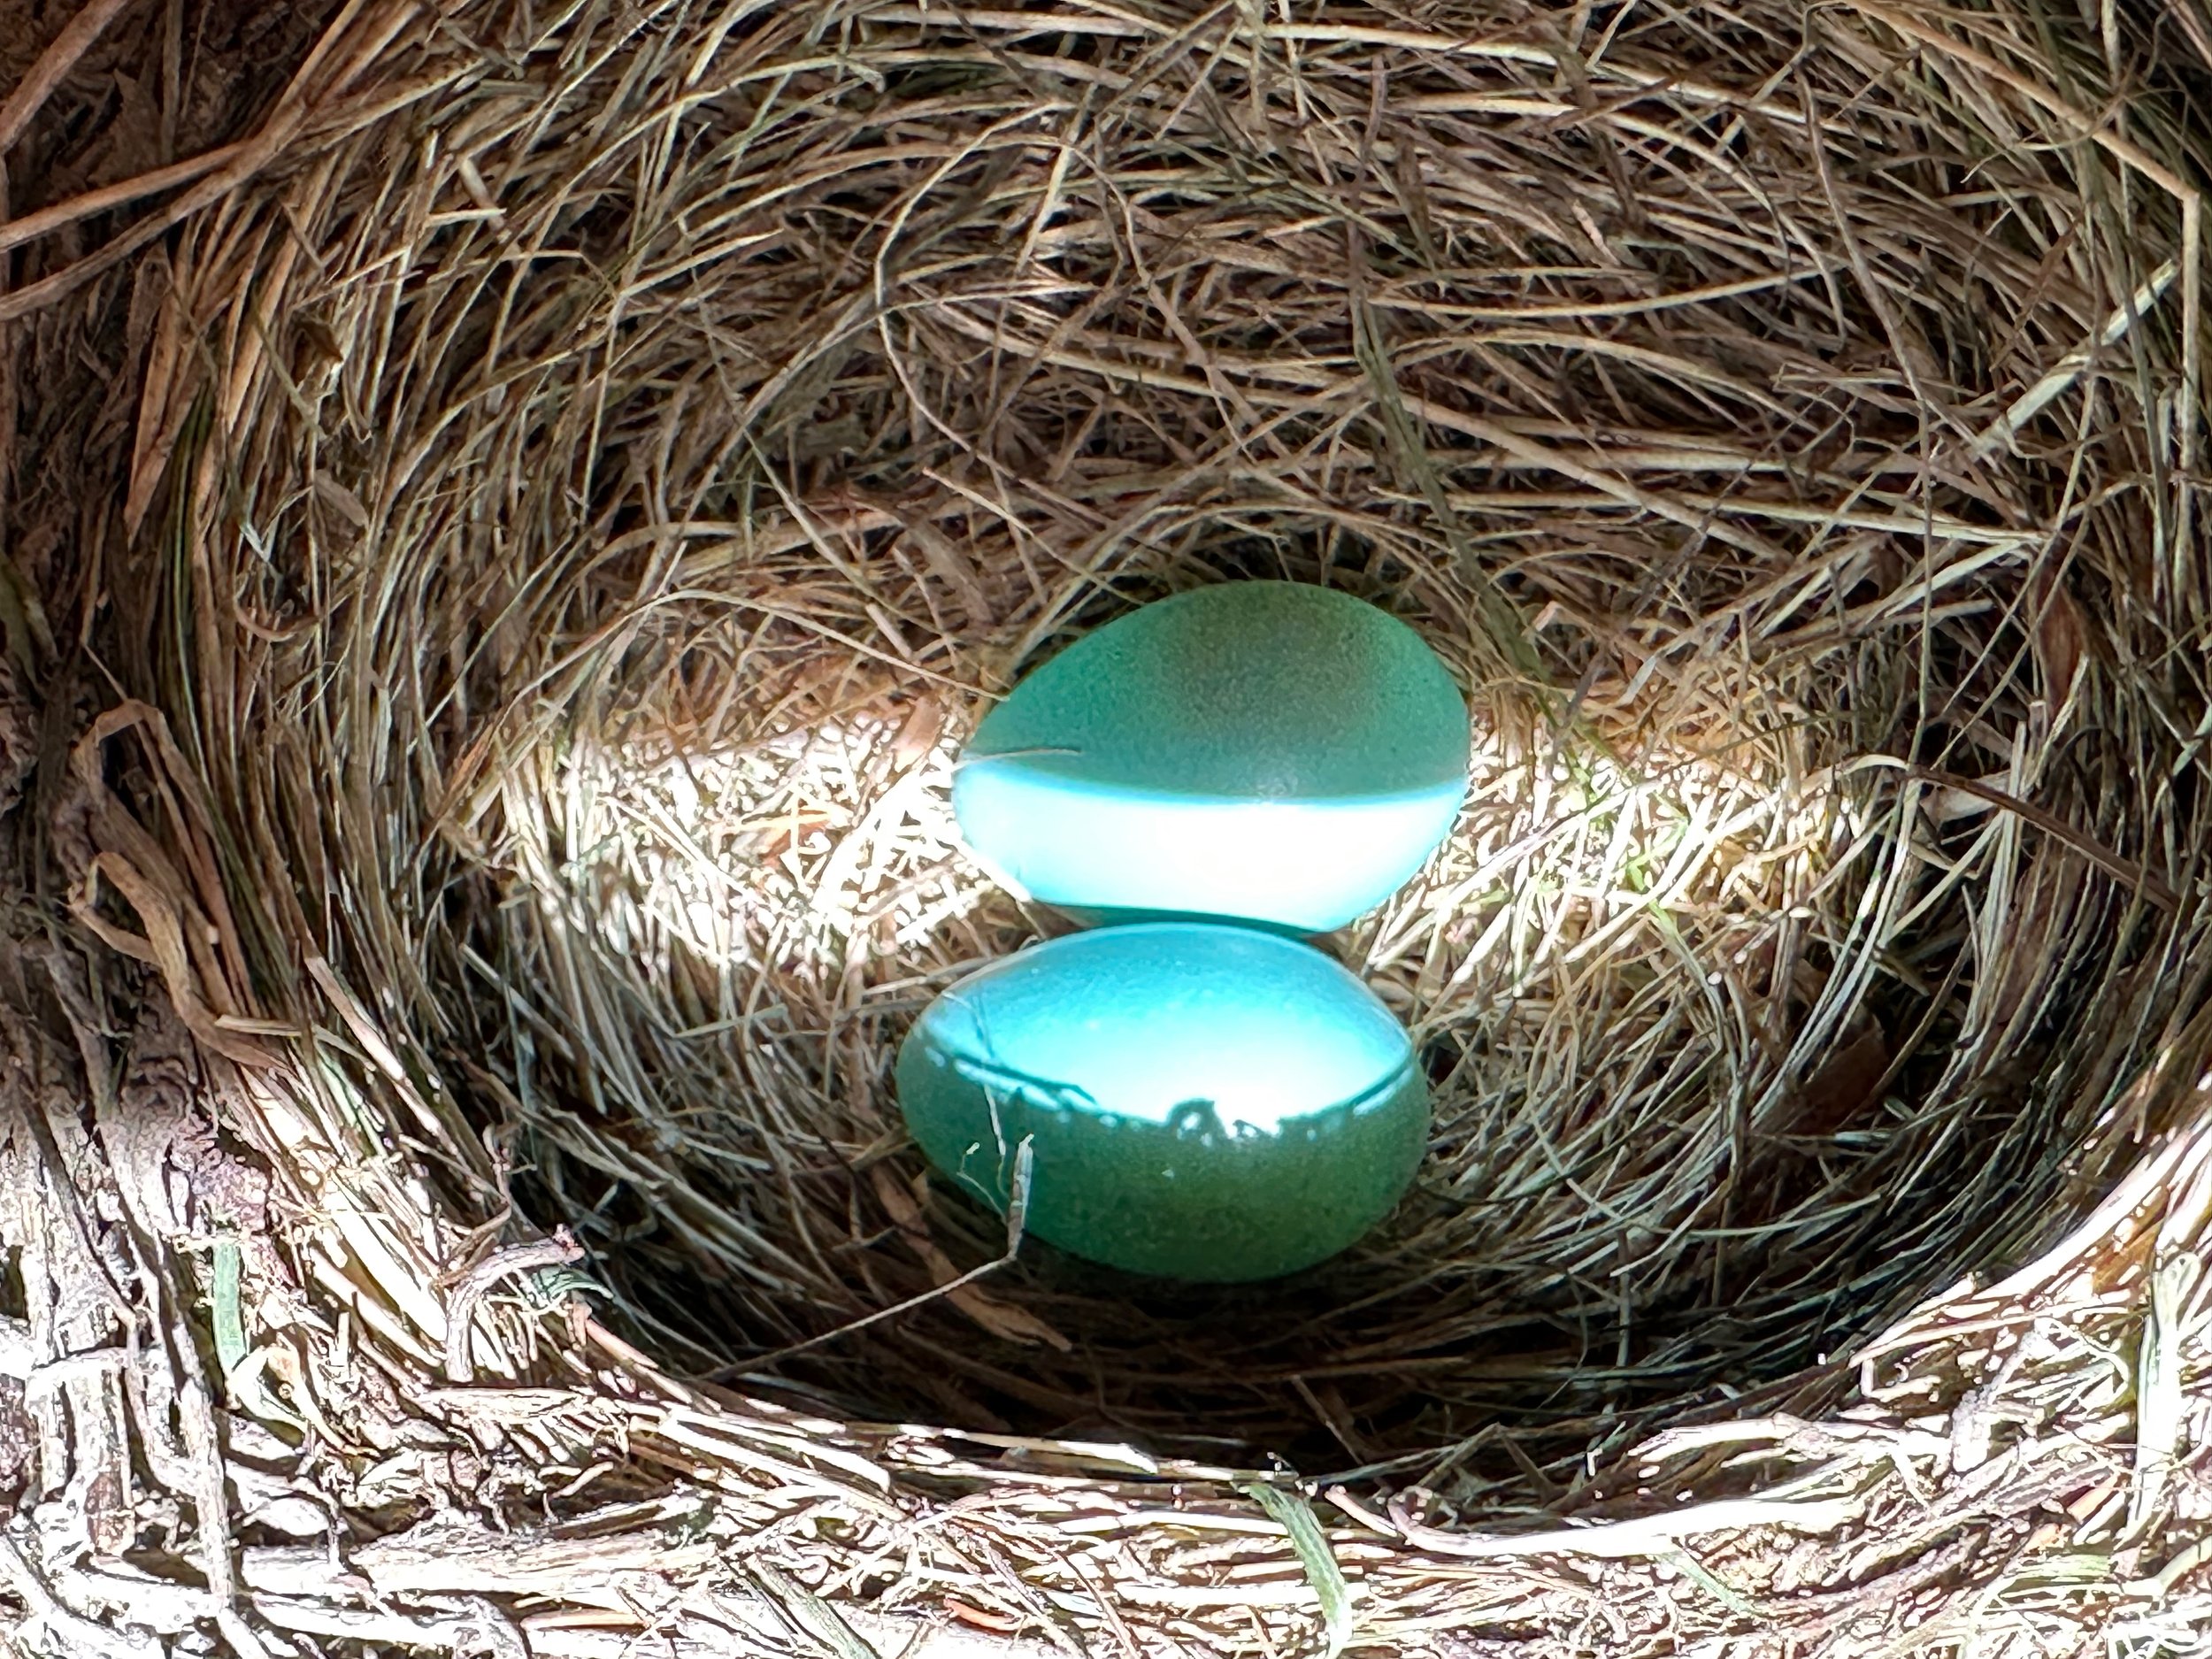  A robin’s nest with those amazing turquoise colored eggs.  